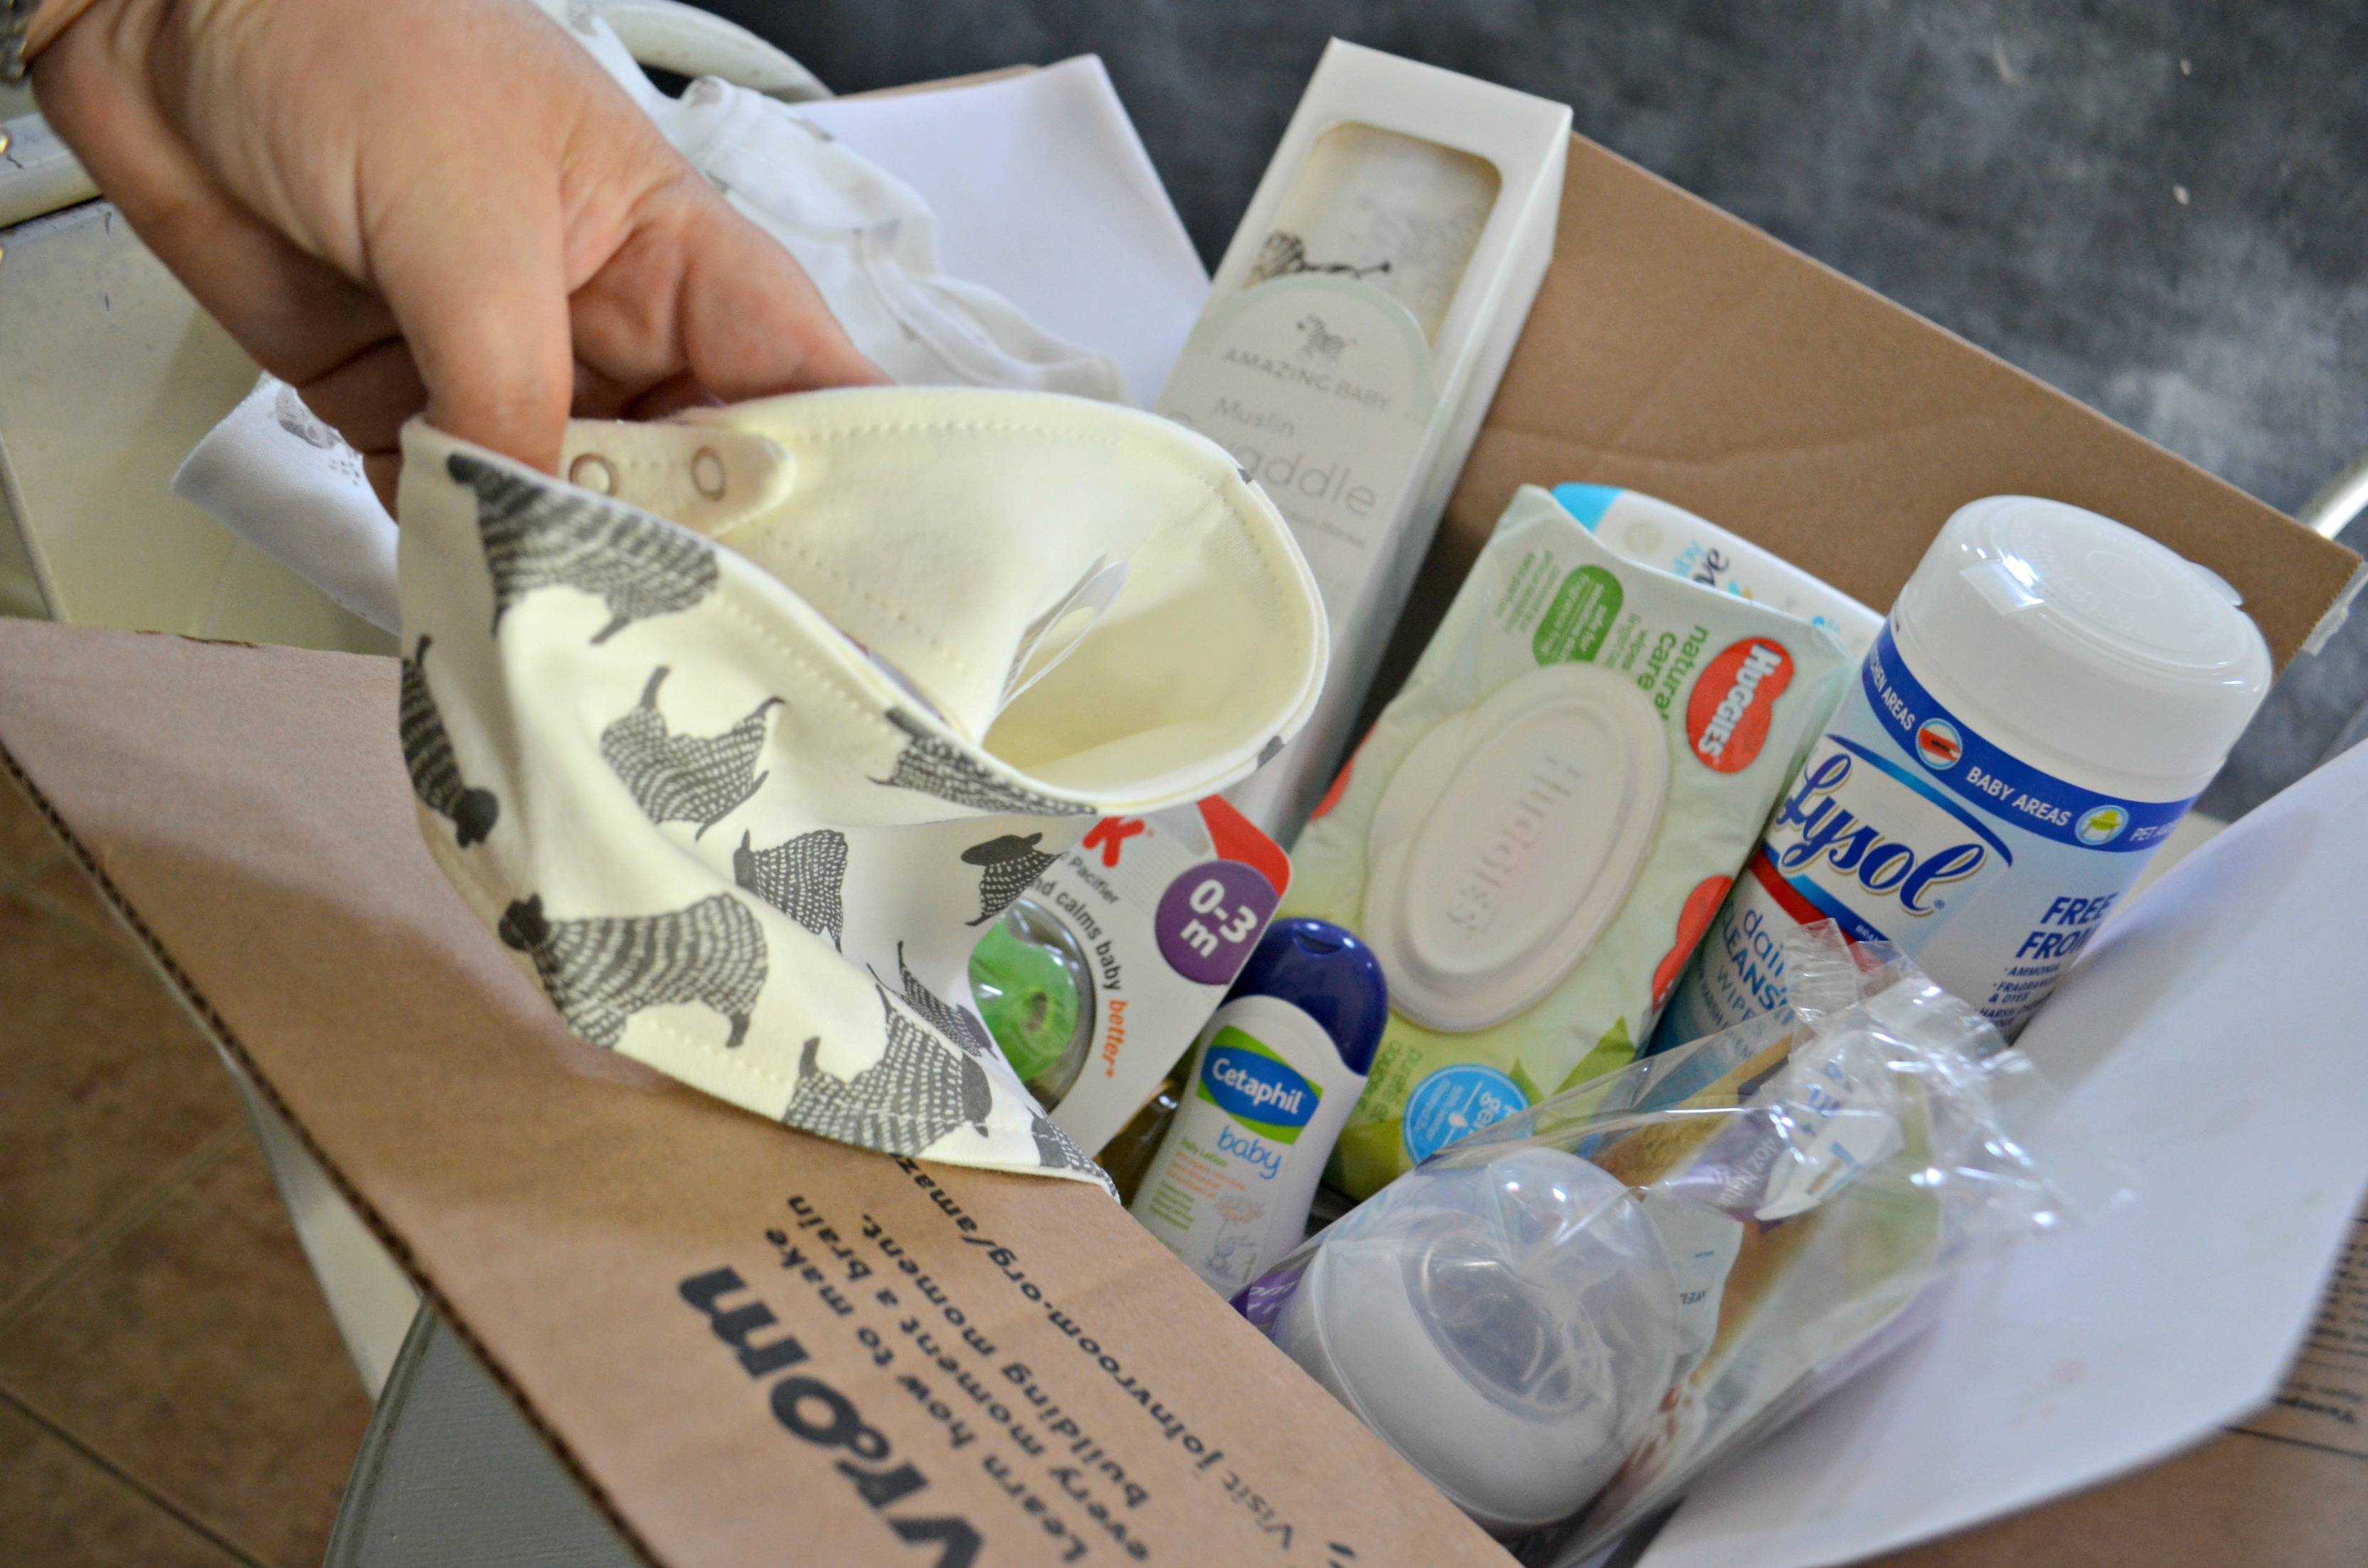 Get a Free Amazon Baby Registry Box – Amazon Baby Registry Welcome Box items inside